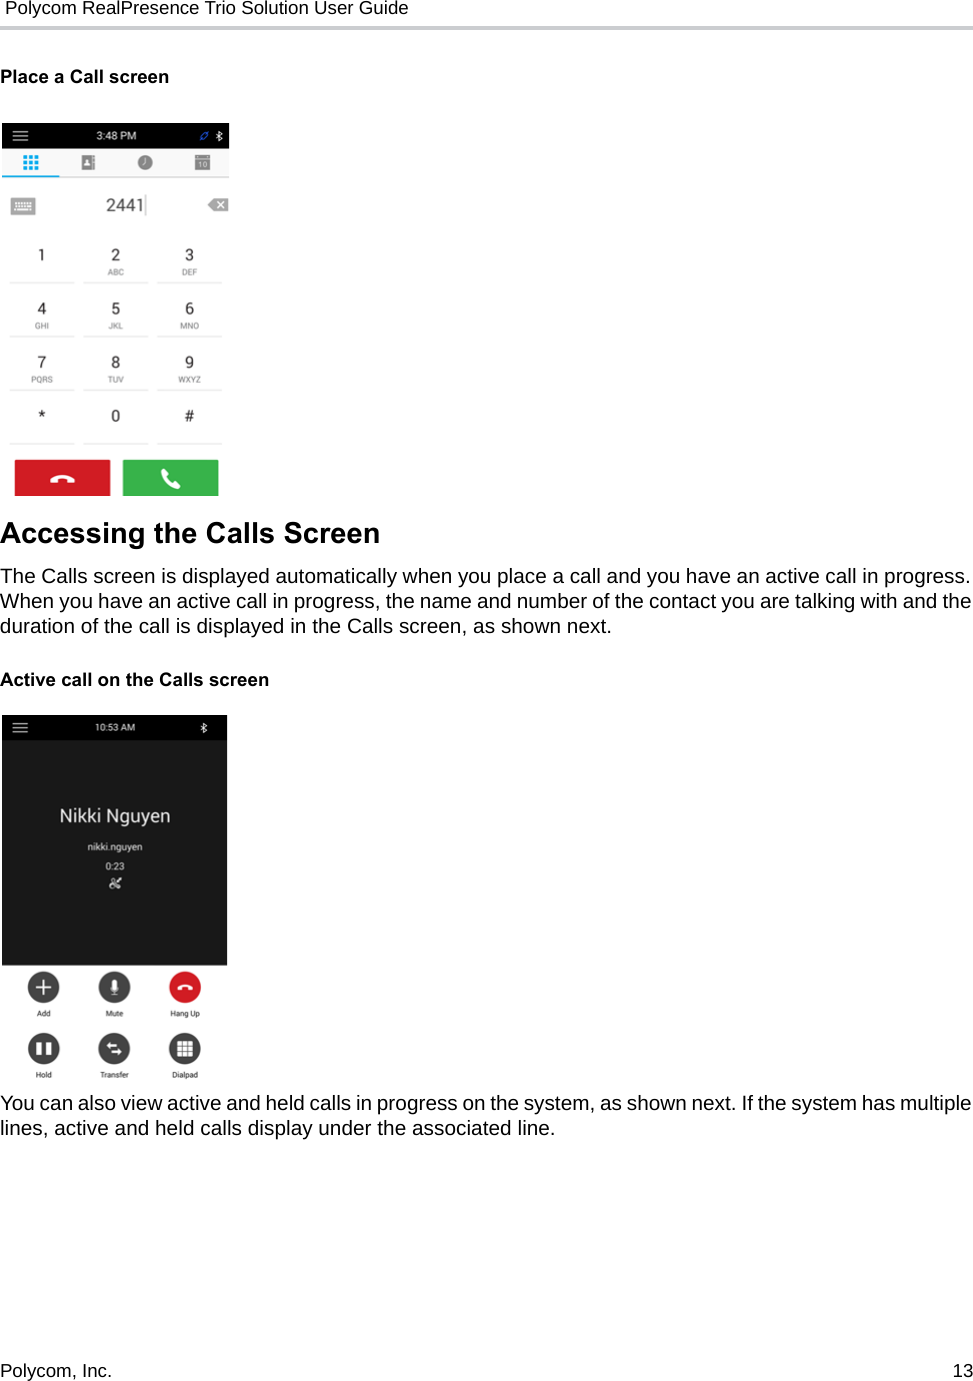  Polycom RealPresence Trio Solution User GuidePolycom, Inc.  13   Place a Call screen Accessing the Calls ScreenThe Calls screen is displayed automatically when you place a call and you have an active call in progress. When you have an active call in progress, the name and number of the contact you are talking with and the duration of the call is displayed in the Calls screen, as shown next. Active call on the Calls screenYou can also view active and held calls in progress on the system, as shown next. If the system has multiple lines, active and held calls display under the associated line.